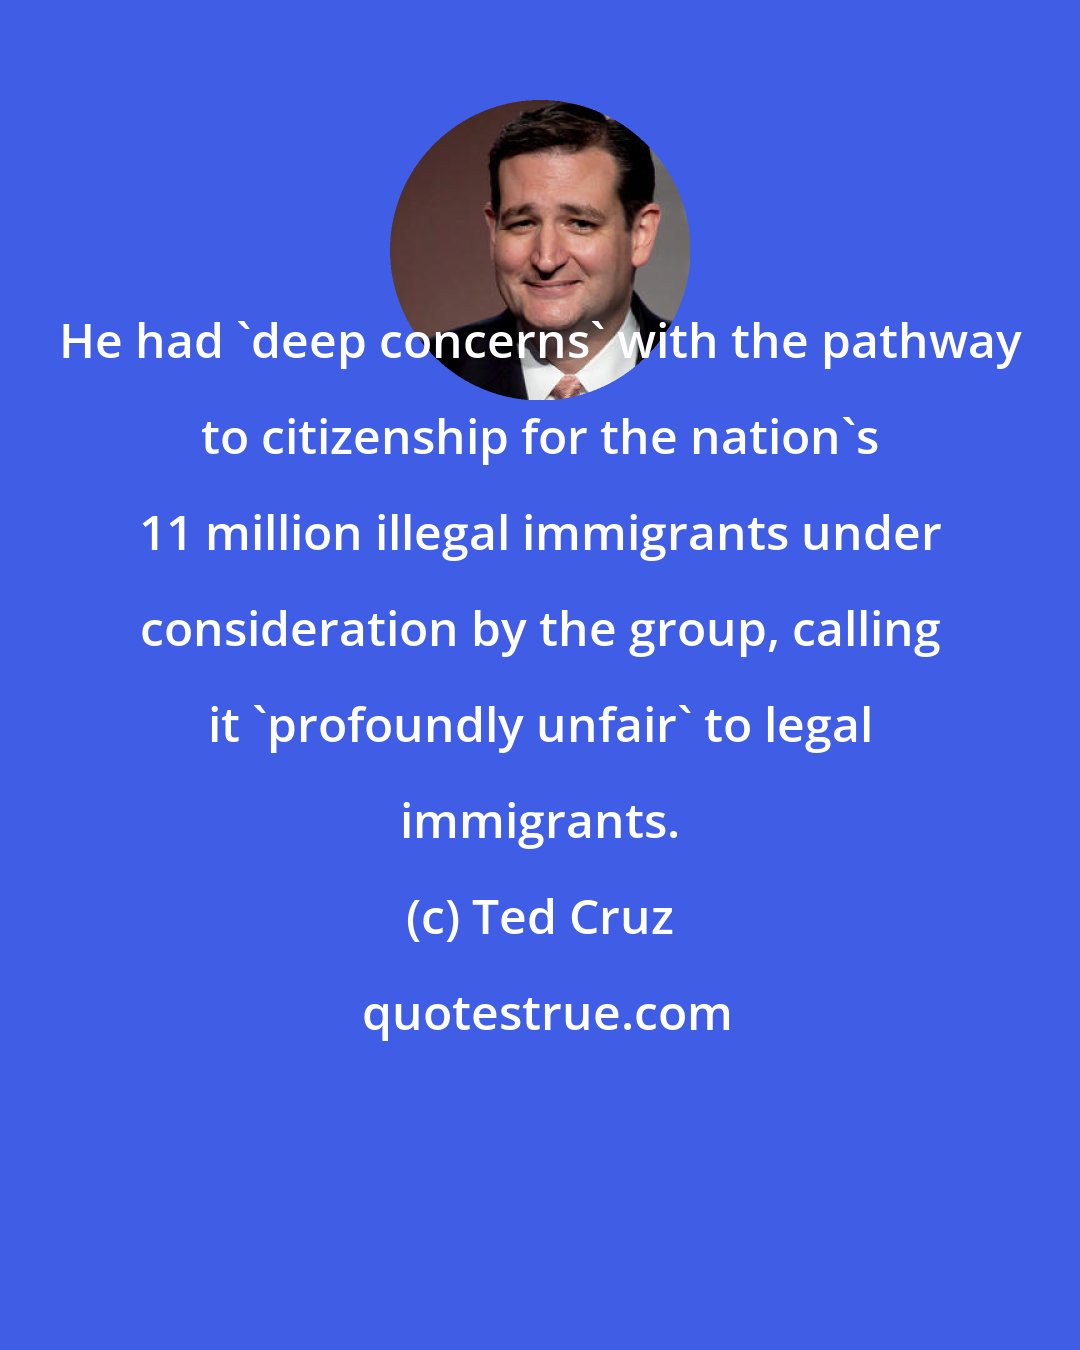 Ted Cruz: He had 'deep concerns' with the pathway to citizenship for the nation's 11 million illegal immigrants under consideration by the group, calling it 'profoundly unfair' to legal immigrants.